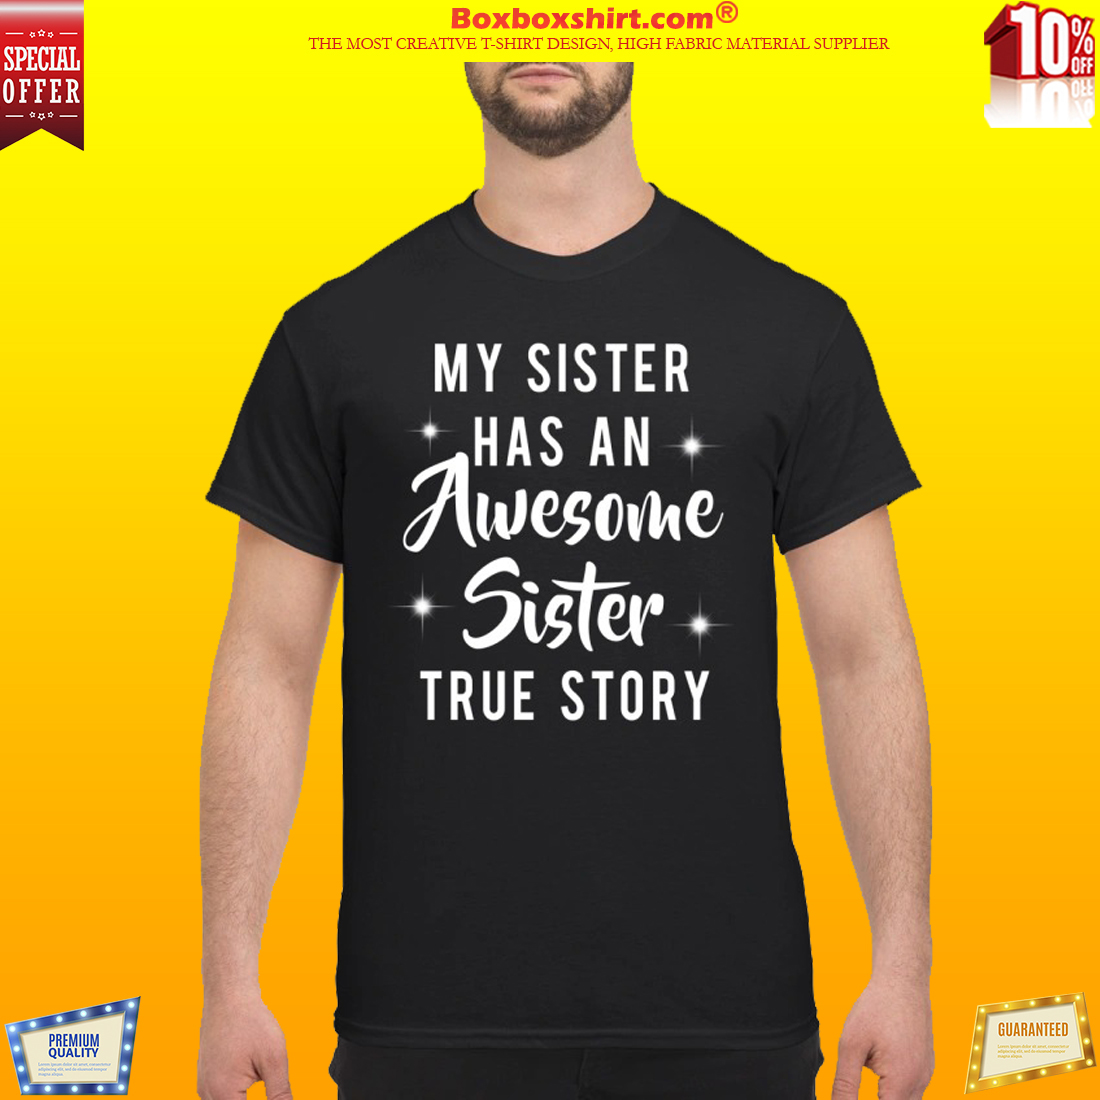 My sister has an awesome sister true story classic shirt